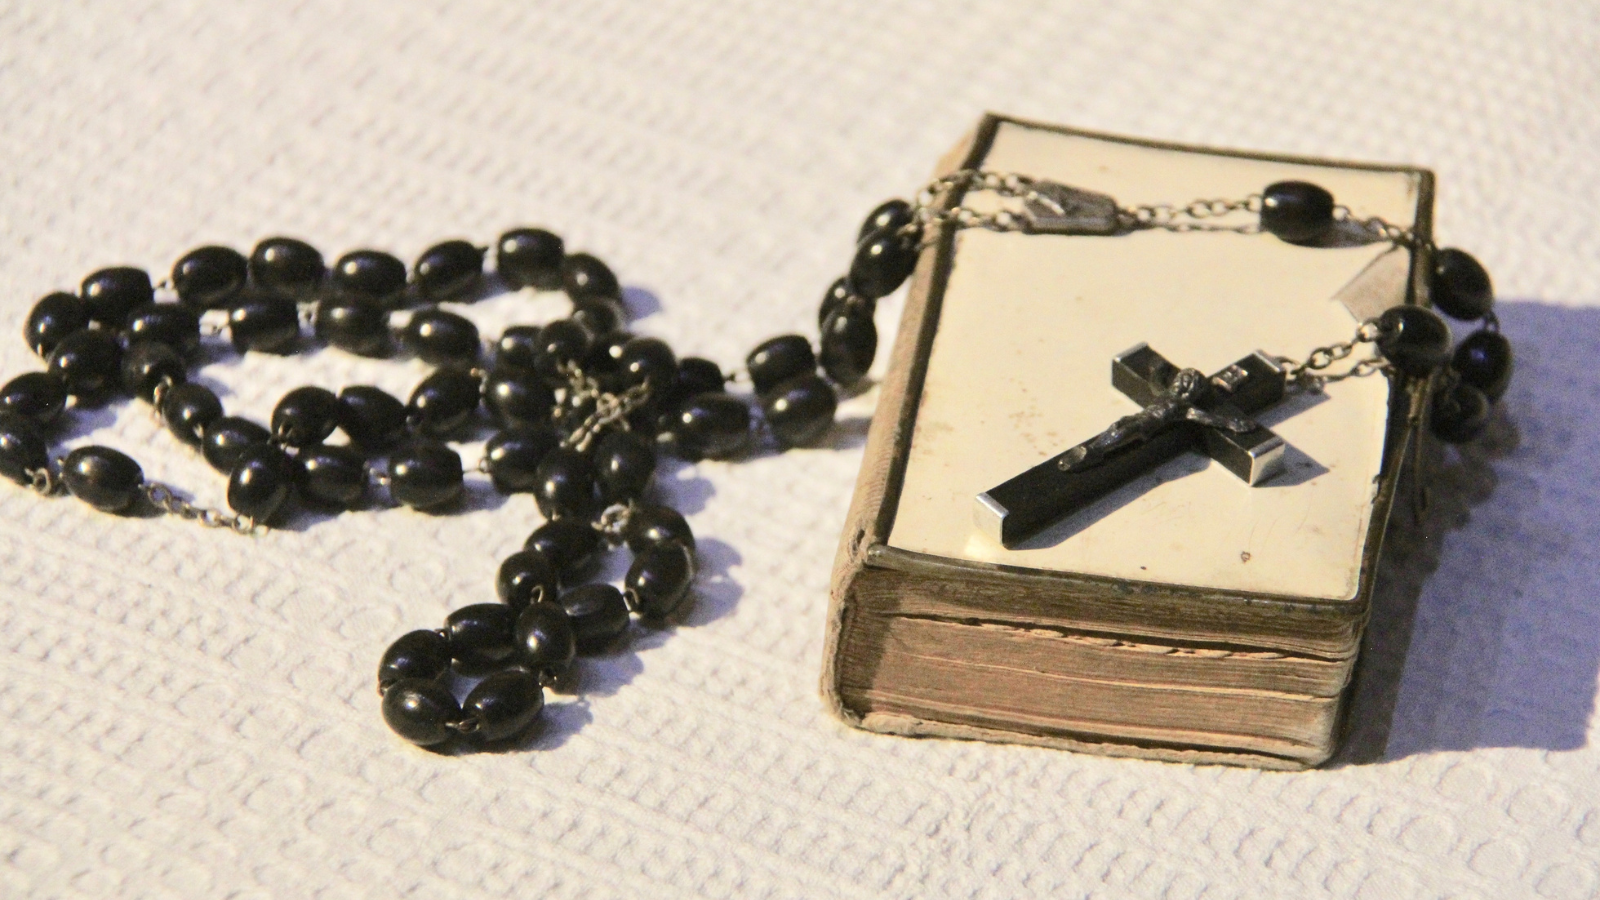 A closed book with a black rosary strewn across it.